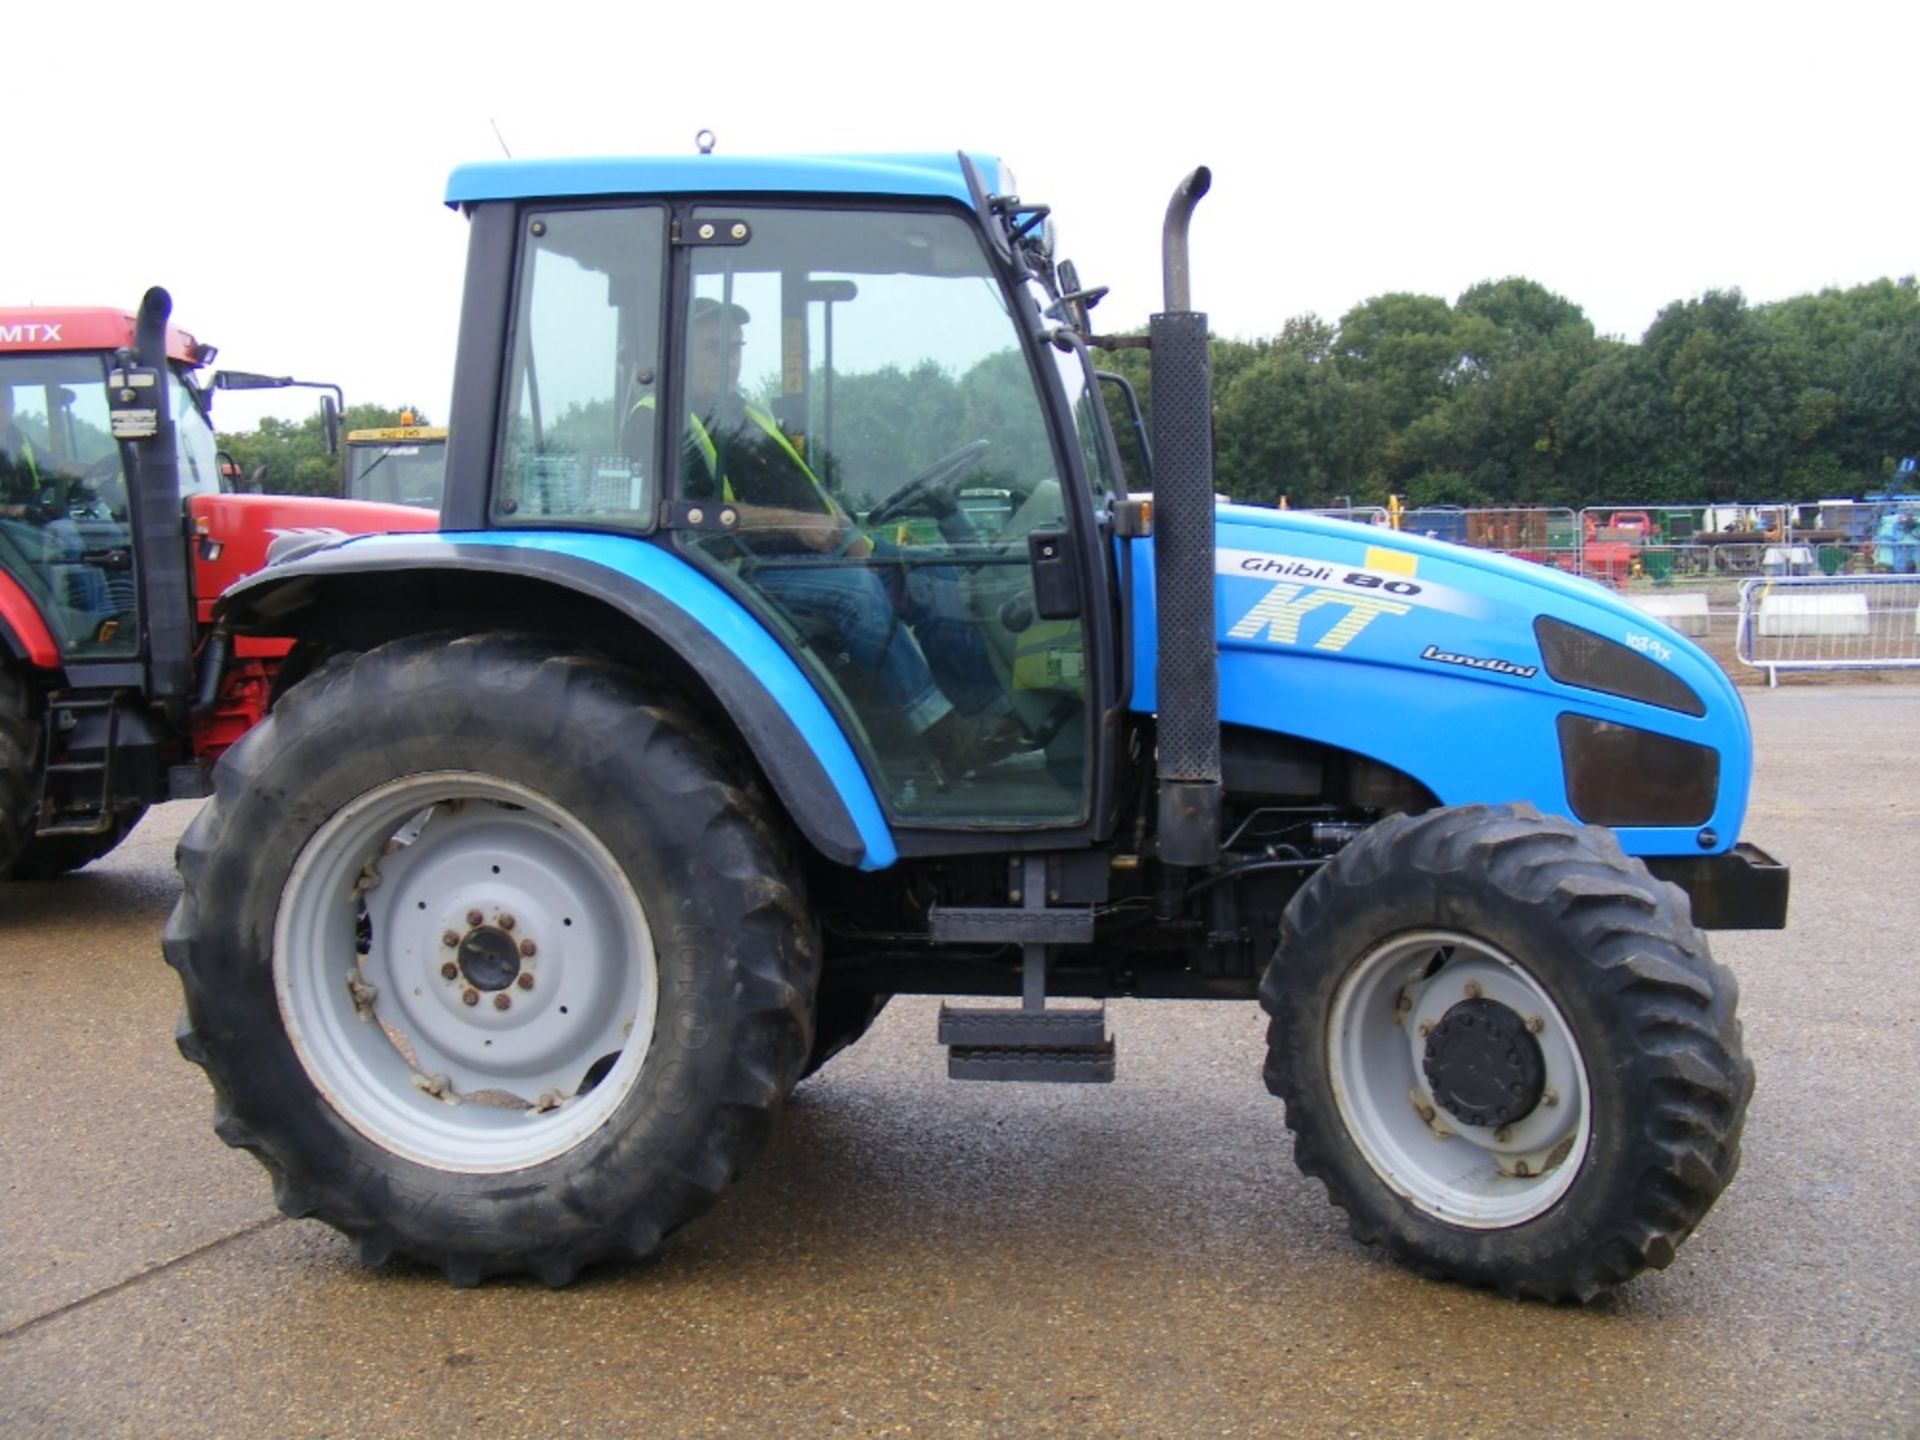 Landini Ghibli 80 4wd Tractor. 1 owner. Circa 3600 hrs. UNRESERVED LOT - Image 3 of 6